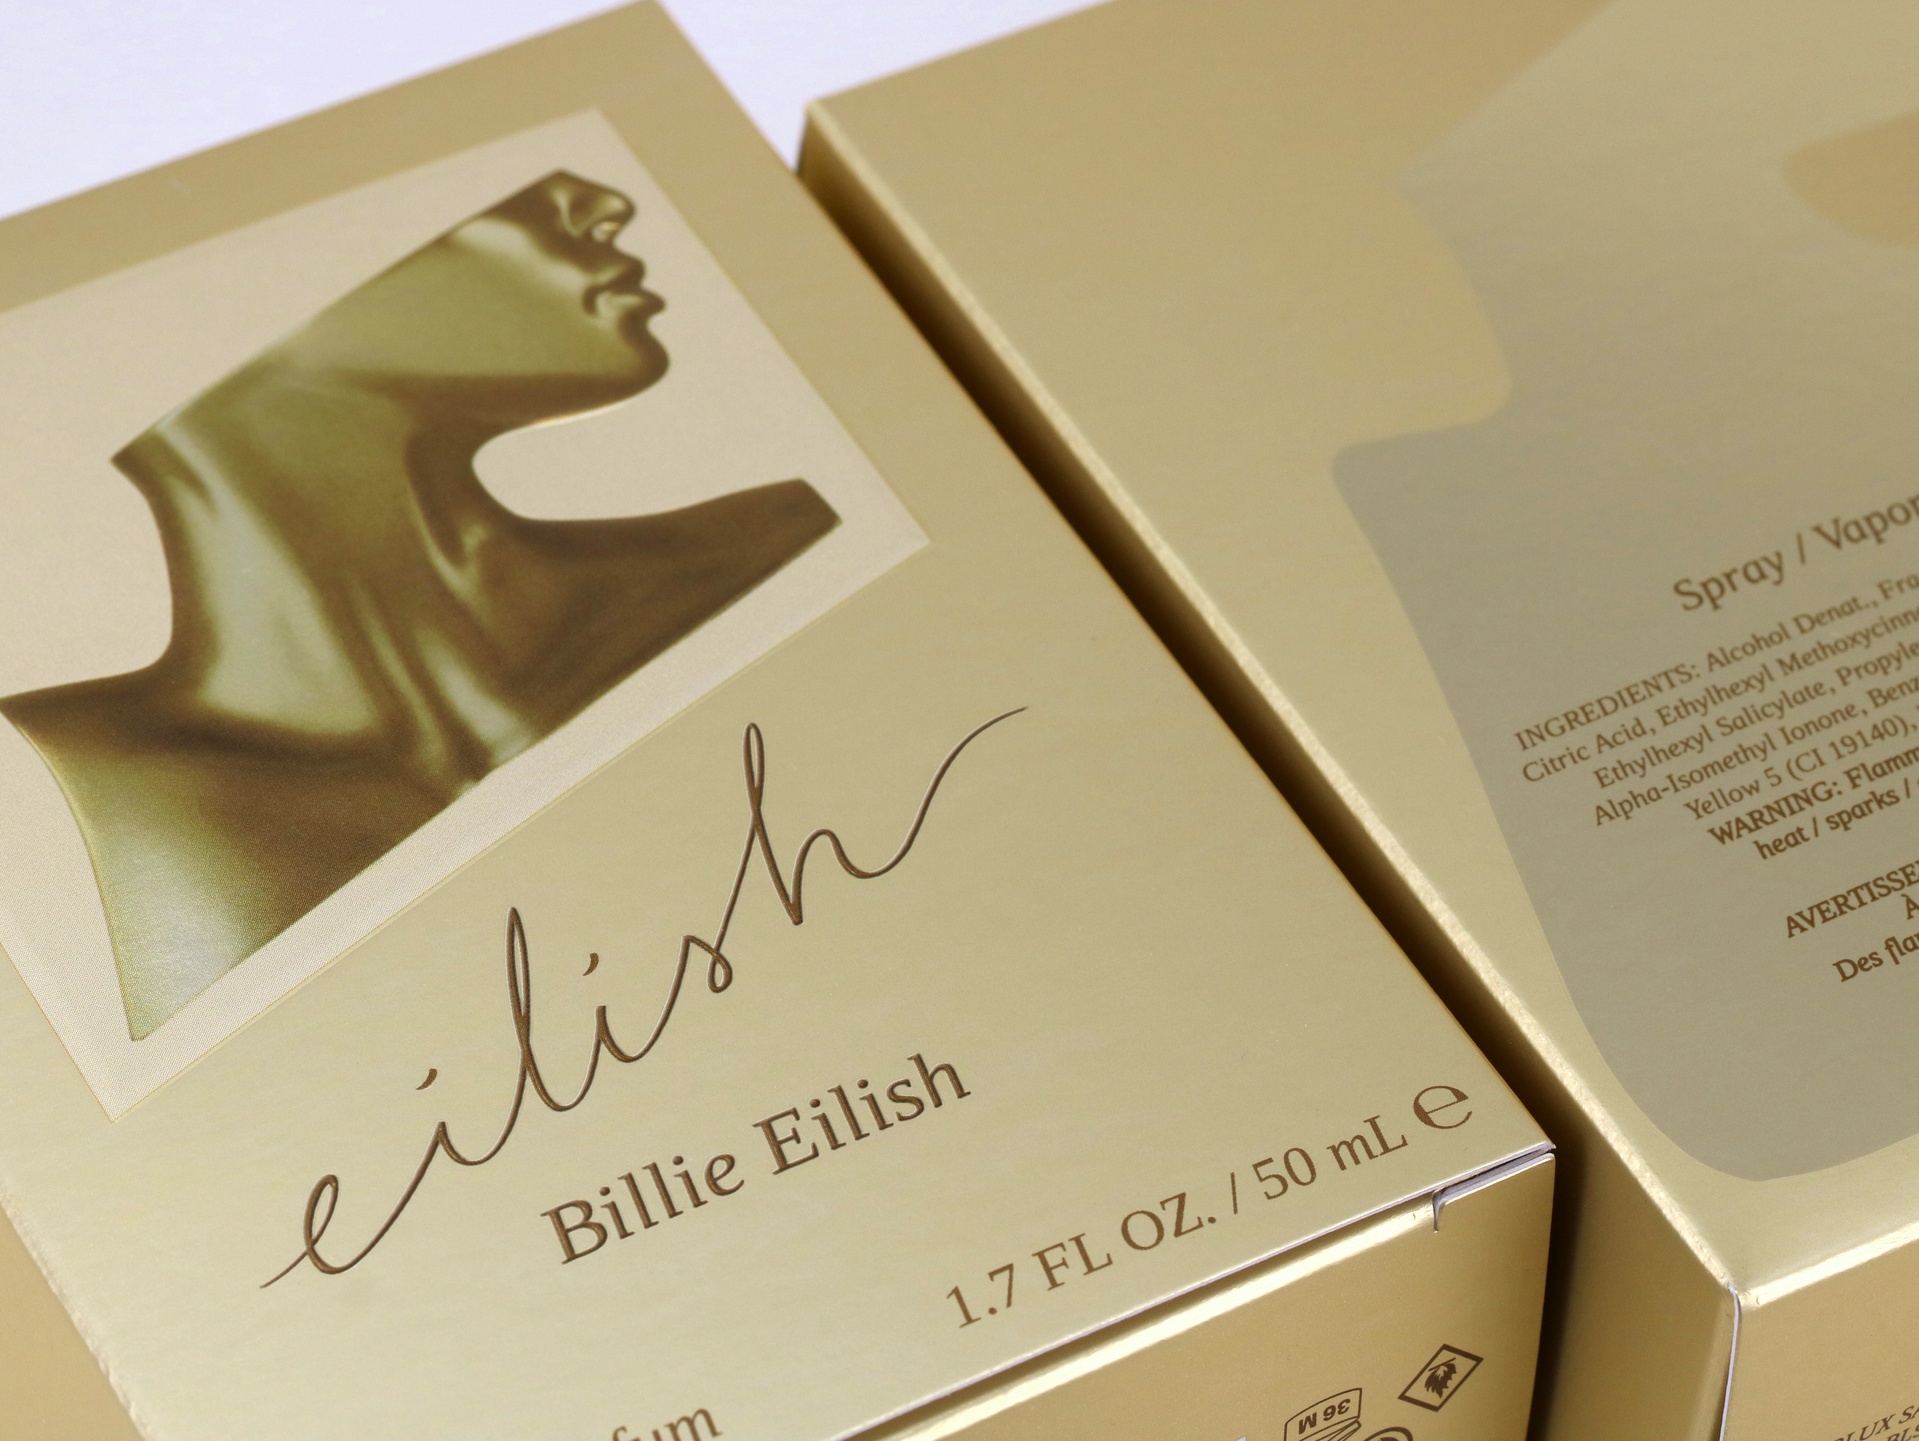 Billie Eilish folding cartons (front and rear)